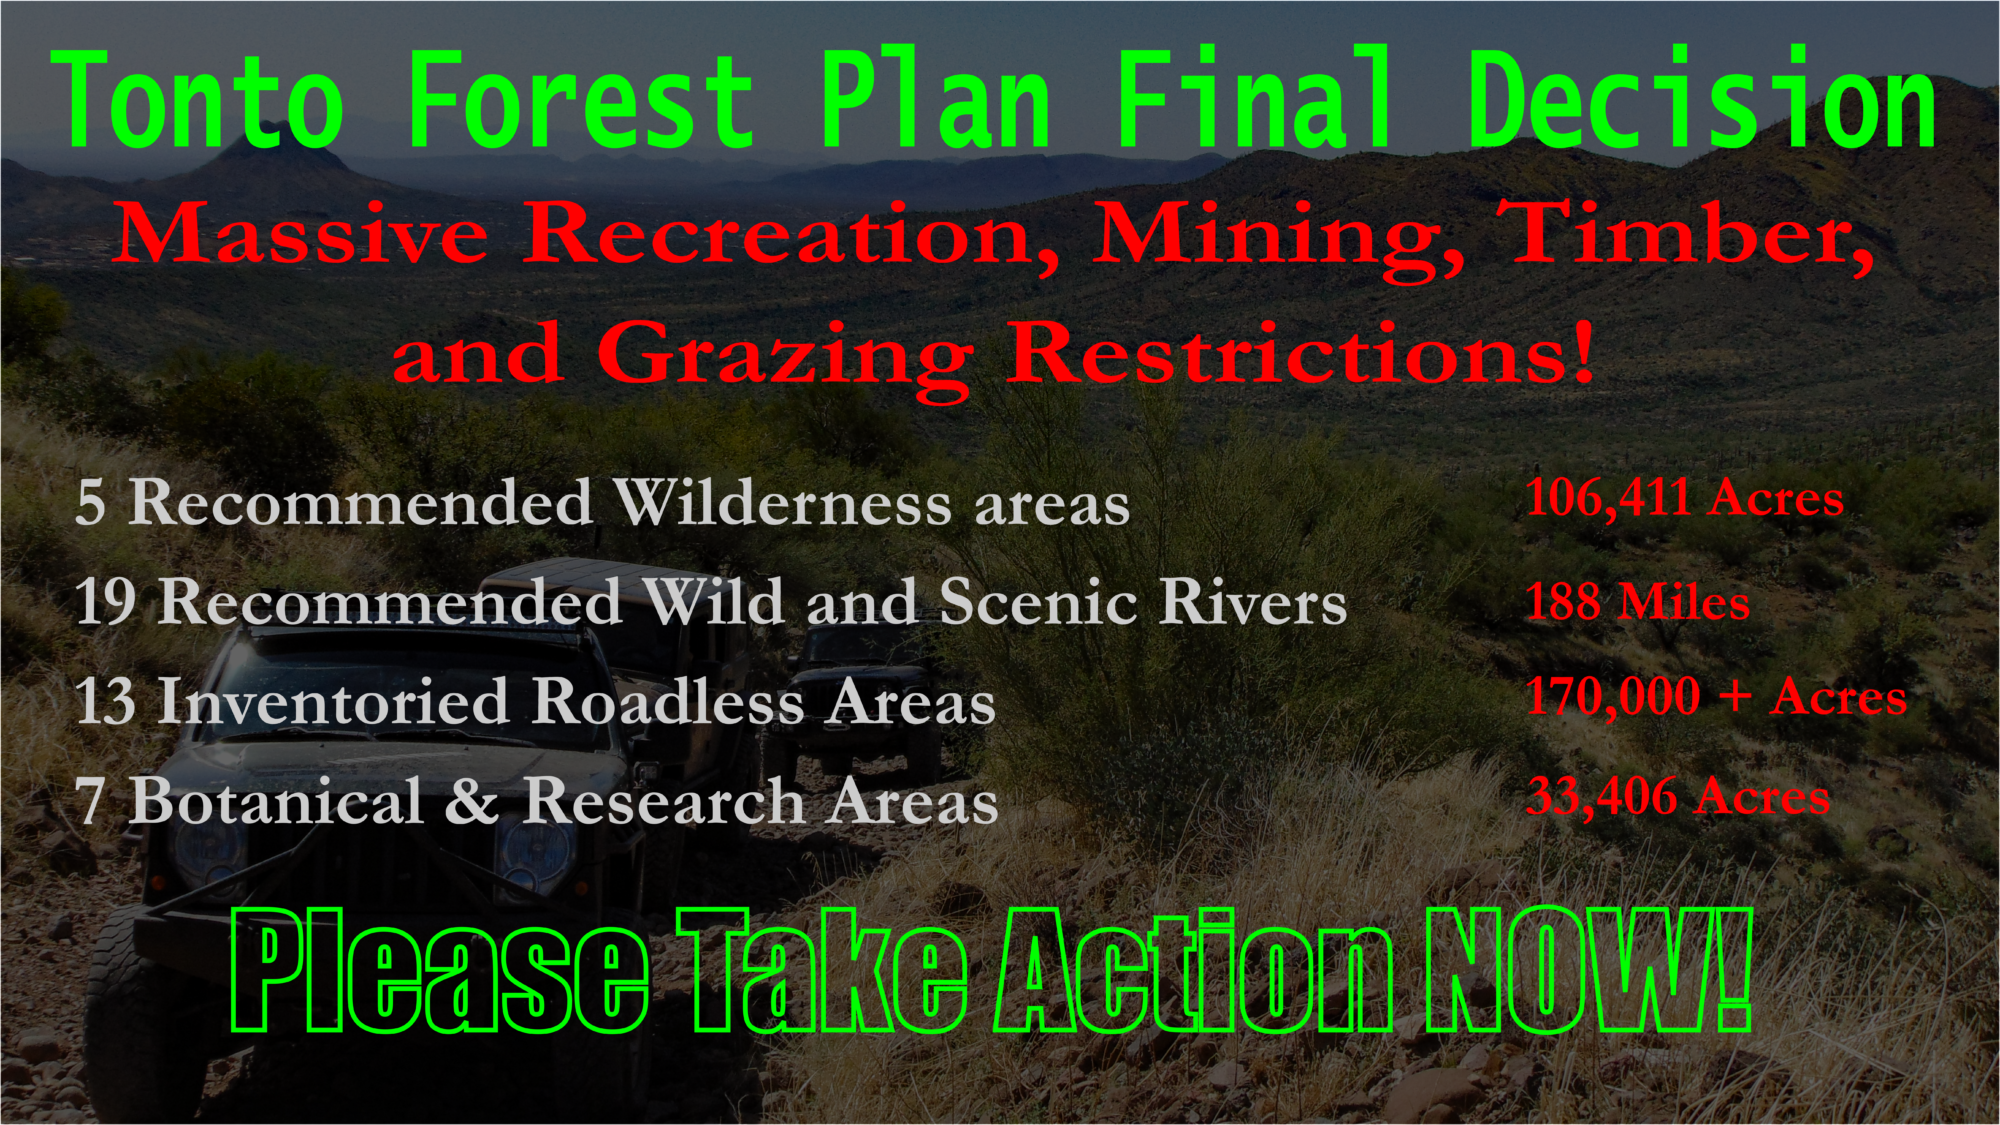 ACTION ALERT | Massive Changes to the Tonto Forest